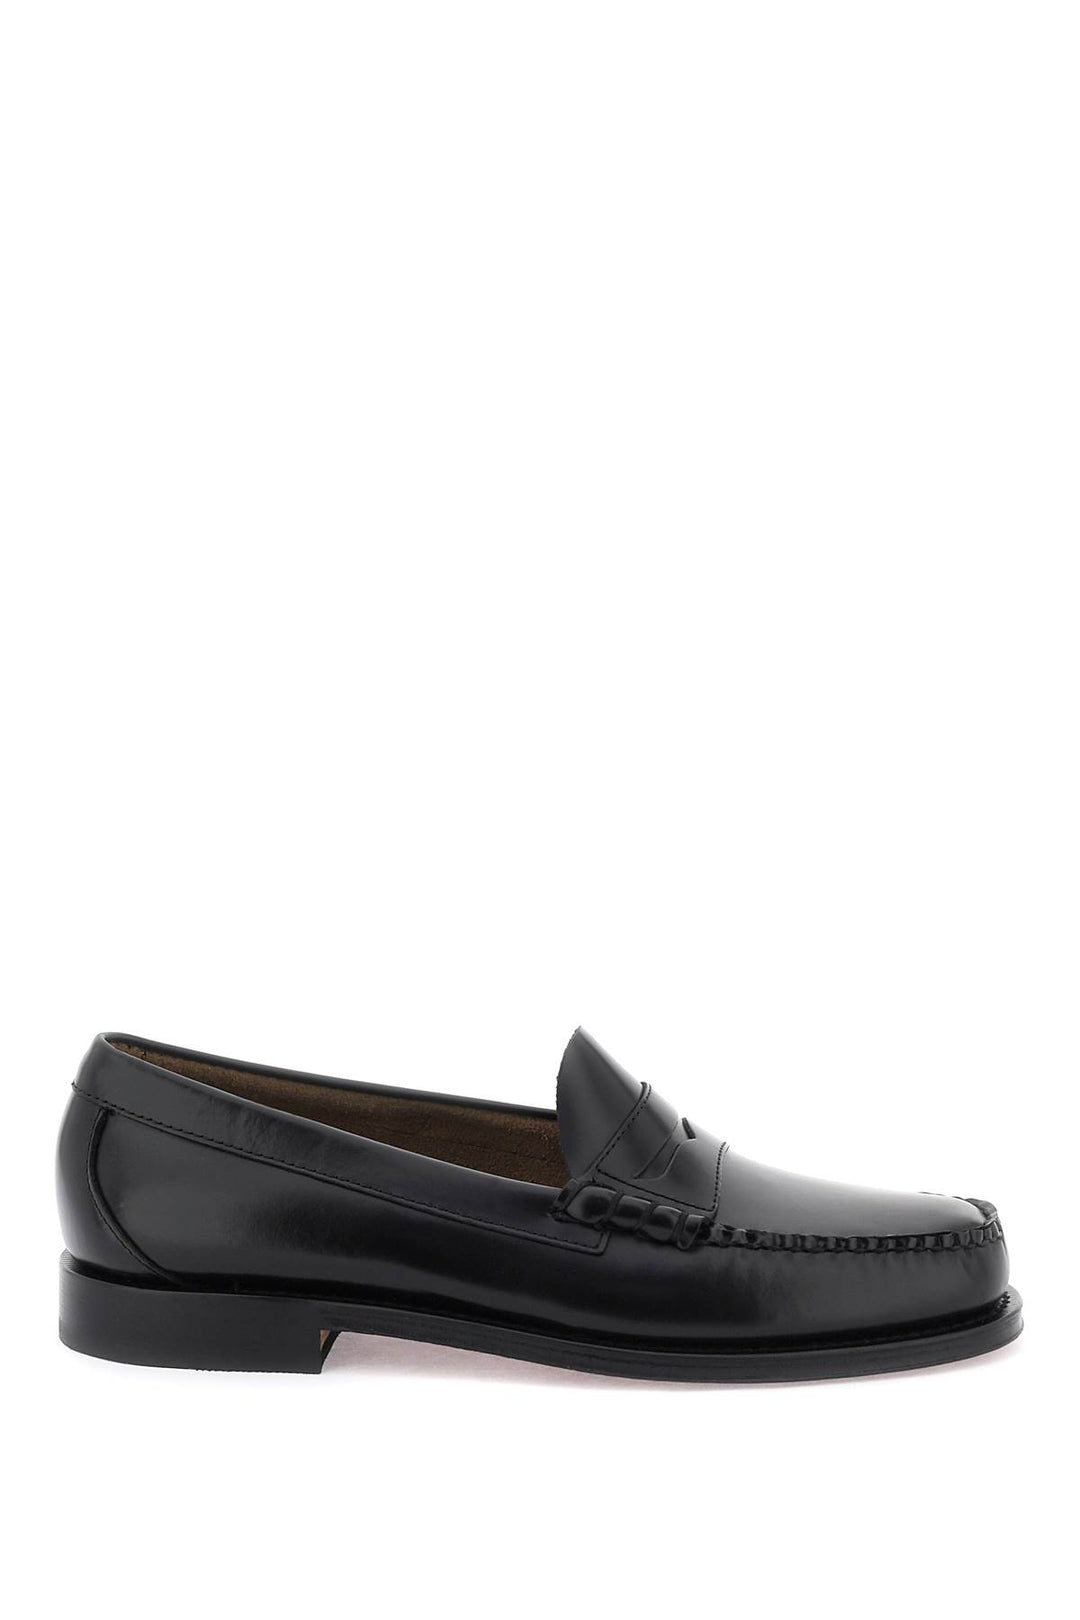 G.H. Bass Weejuns Larson Penny Loafers   Black